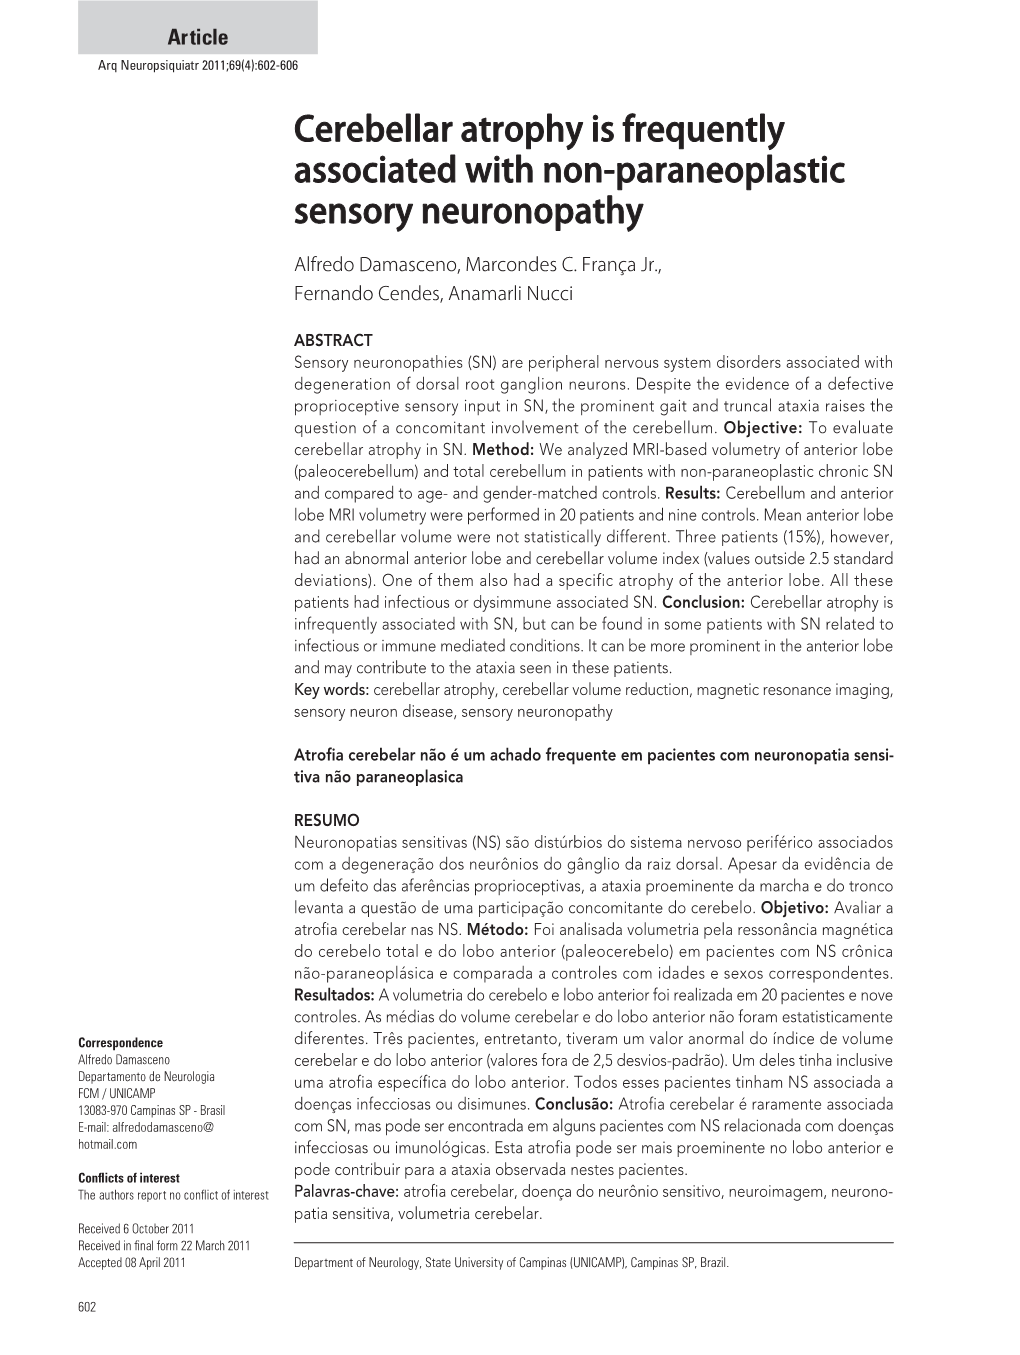 Cerebellar Atrophy Is Frequently Associated with Non-Paraneoplastic Sensory Neuronopathy